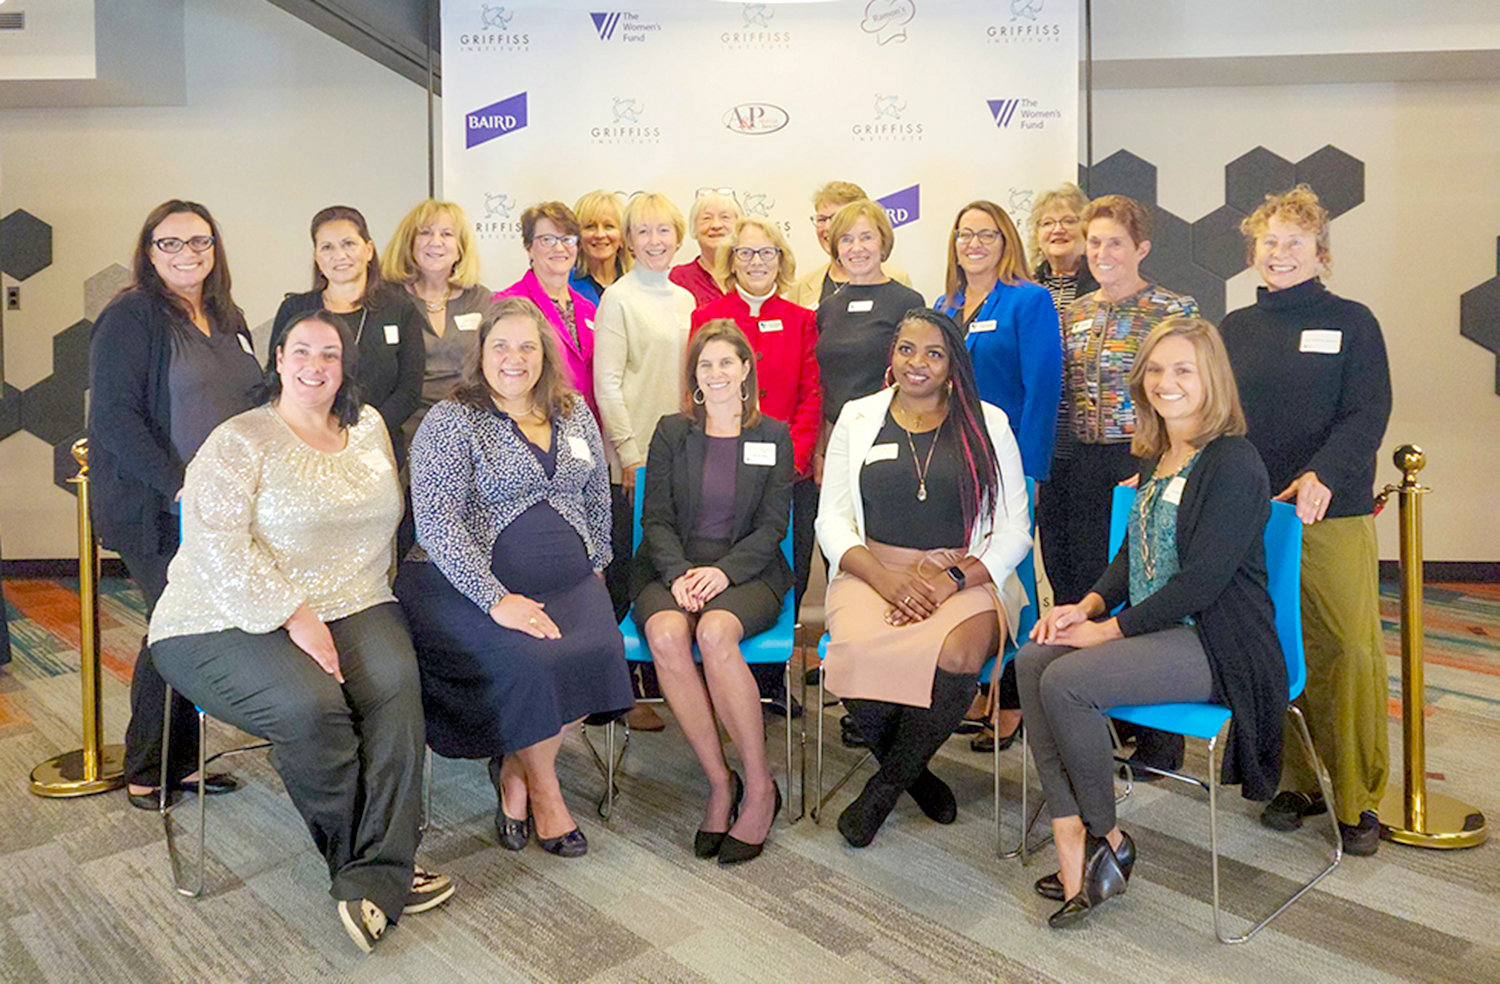 The owners of five area women-owned businesses in the region: TRM Environmental Consultants of Rome; Hilltop Marketing of Frankfort; The Cremeria in Clinton; New Beginnings Academy of Herkimer; and the A-List Salon and Beauty Bar in Utica – pose for a photo along with officials of The Women’s Fund of Herkimer and Oneida Counties at an awards ceremony at the Griffiss Institute on Wednesday. The owners were each awarded $5,000 to support the growth and development of their businesses.